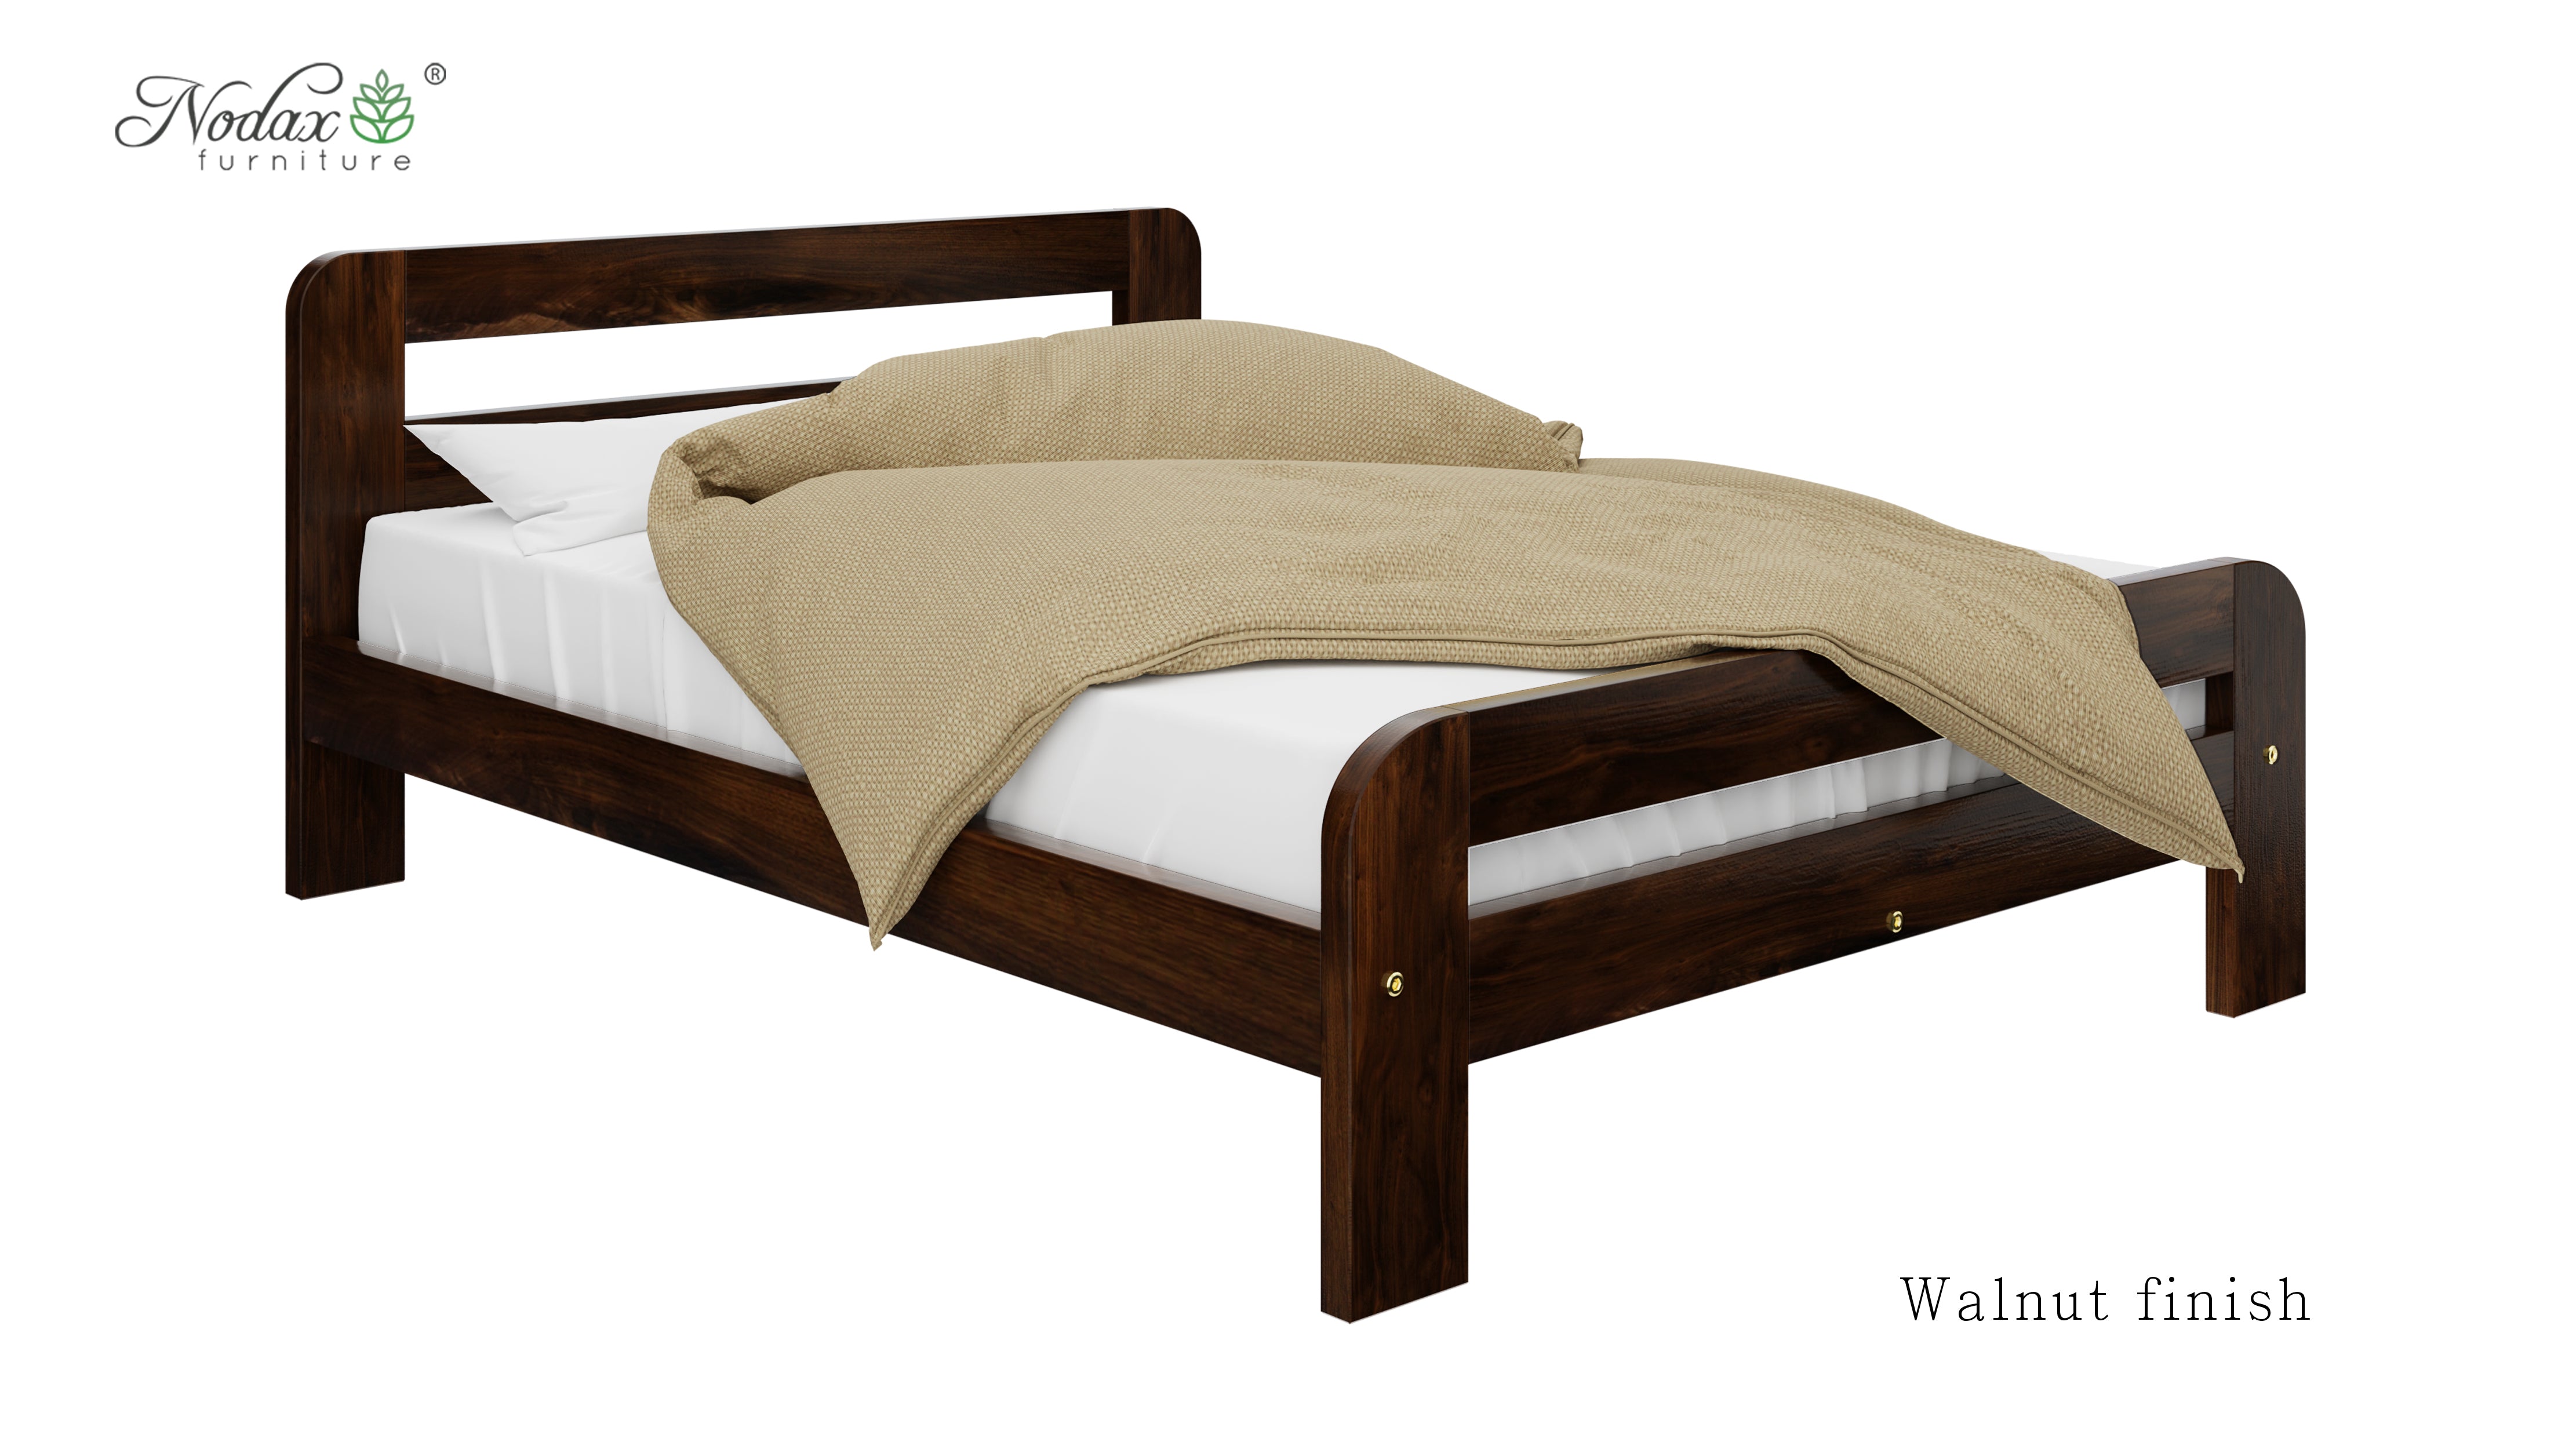 Wooden-bed-frame-small-double